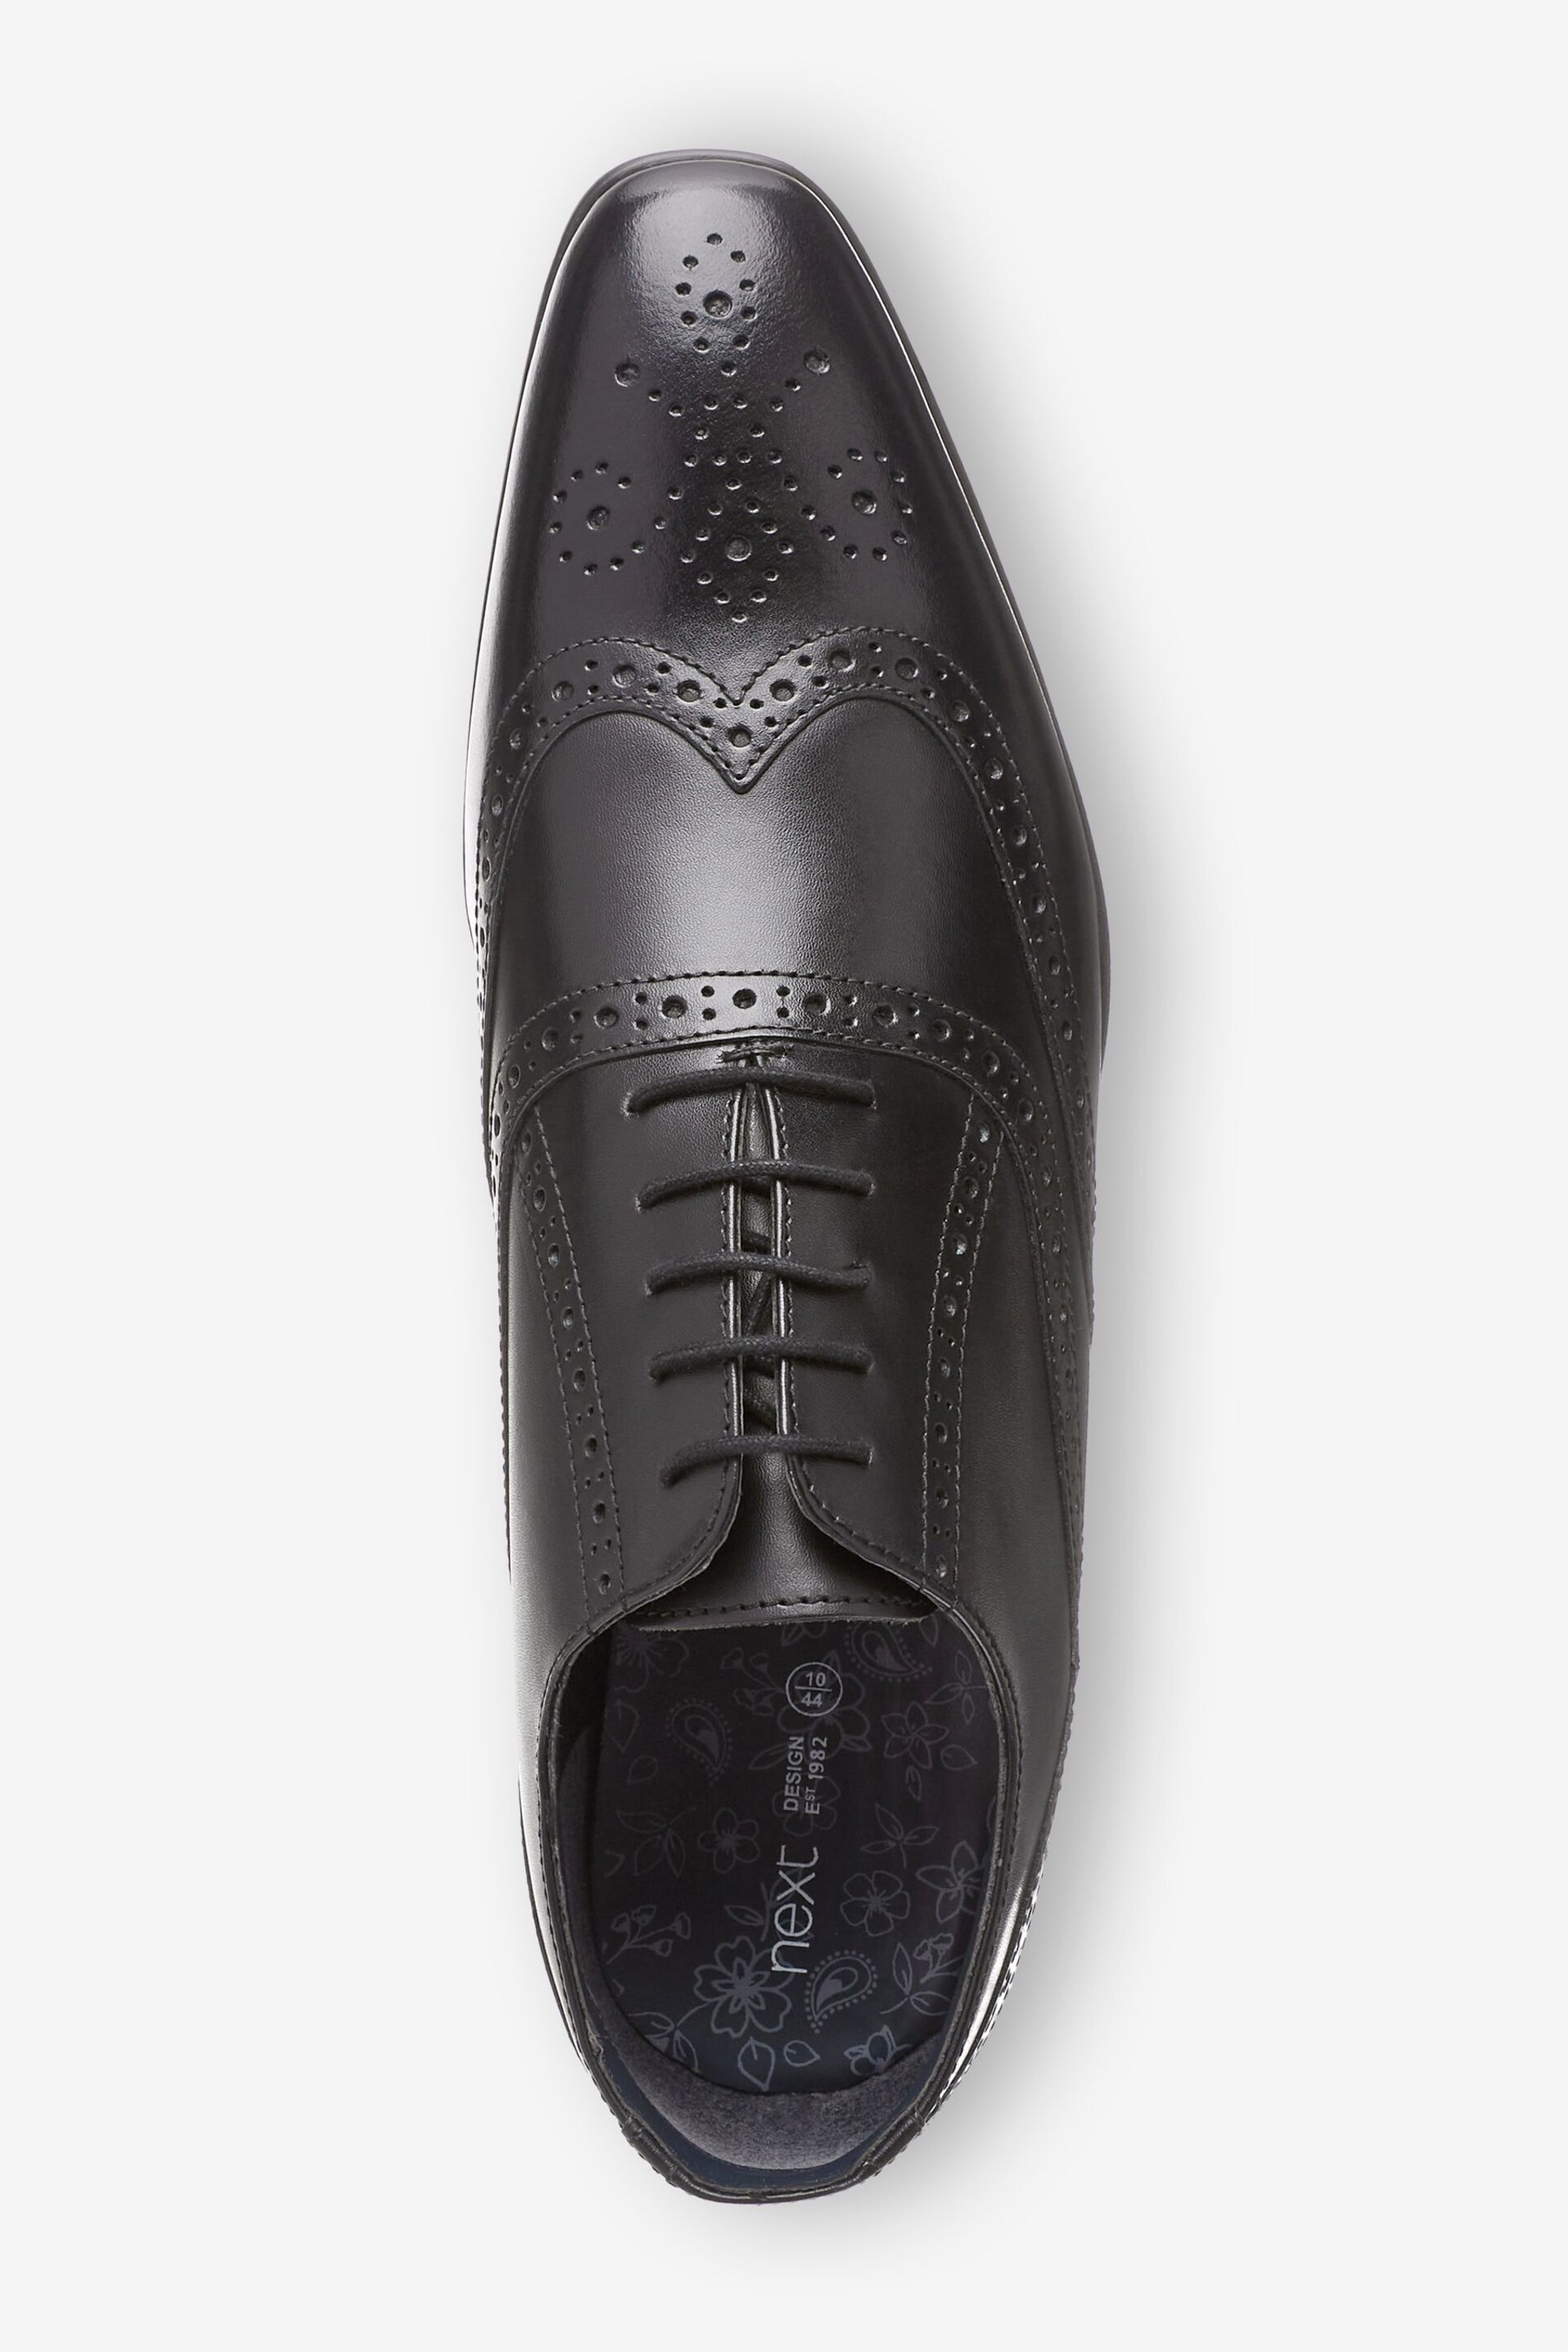 Black Wide Fit Leather Oxford Brogue Shoes - Image 3 of 6